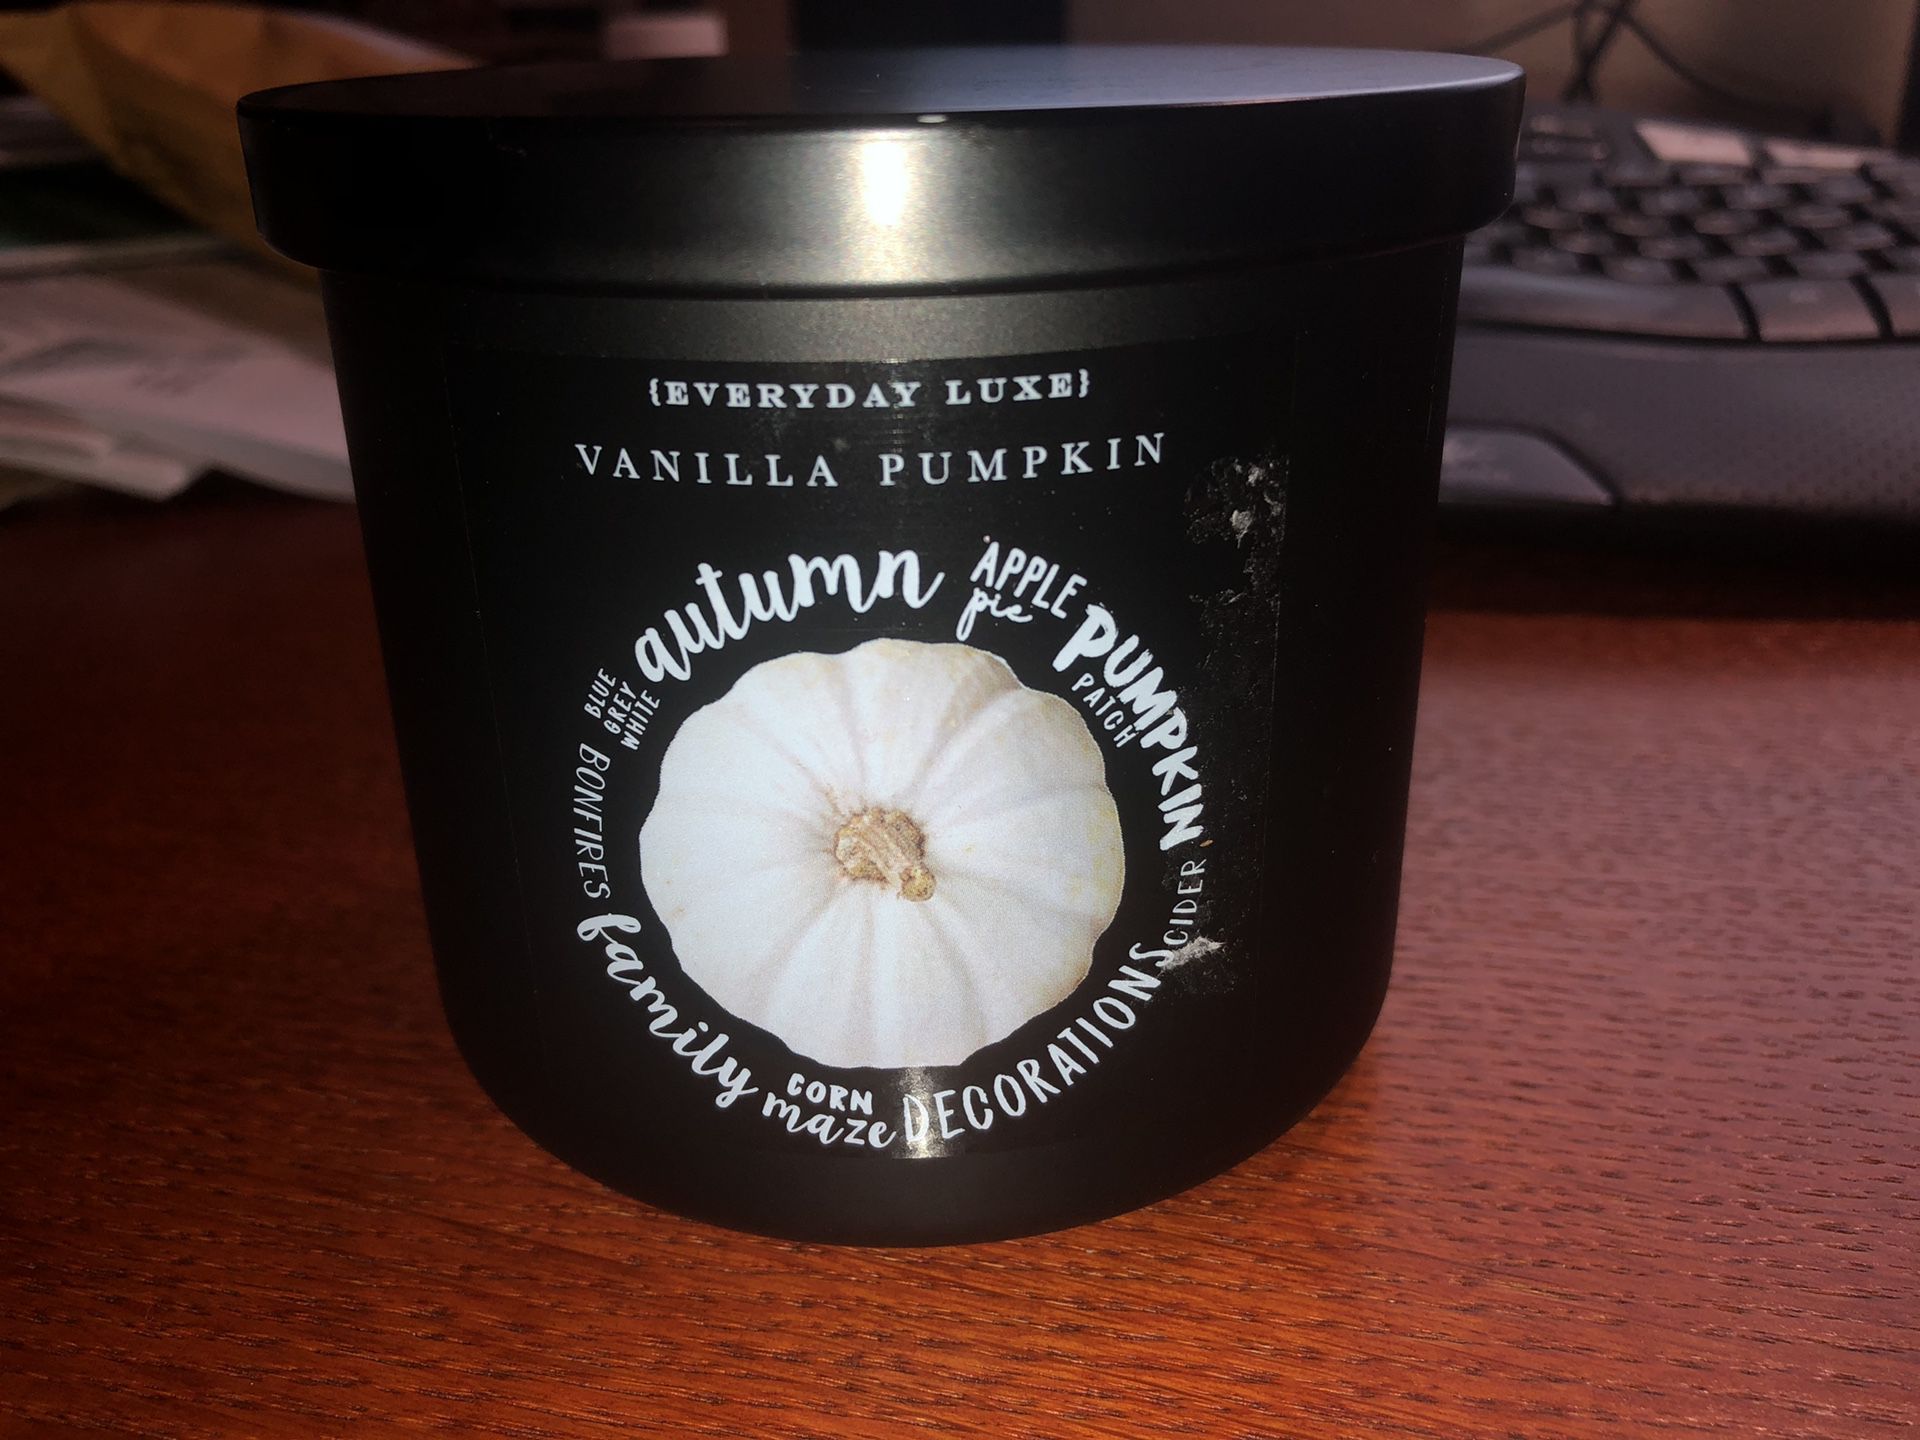 Everyday luxe vanilla pumpkin candle with wood wick